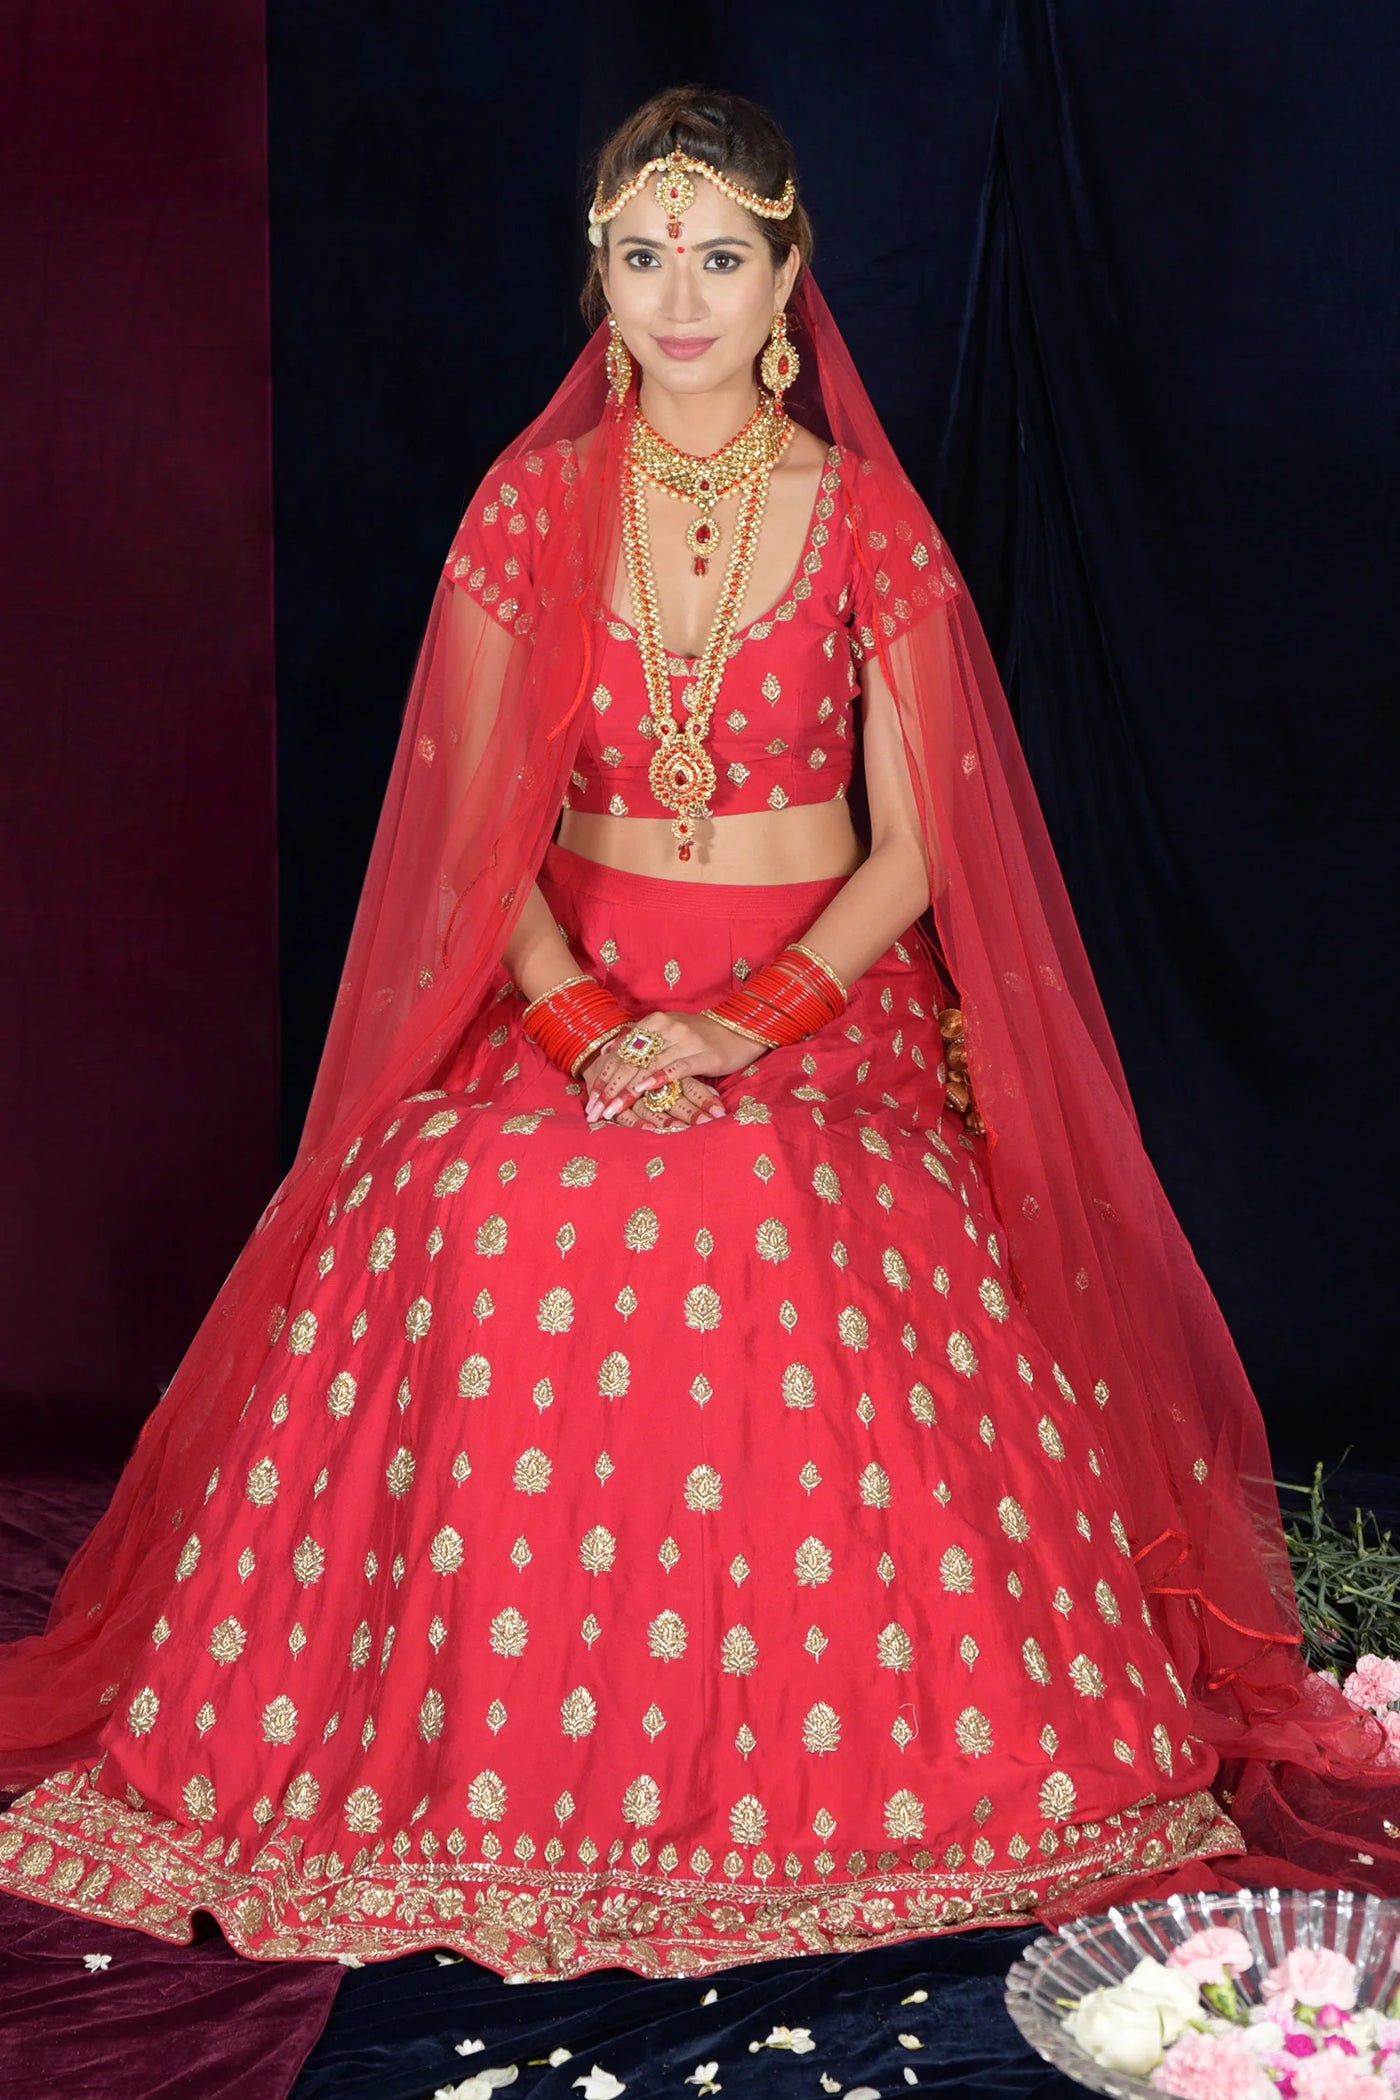 Silk Embroidered Lehenga Set - Indian Clothing in Denver, CO, Aurora, CO, Boulder, CO, Fort Collins, CO, Colorado Springs, CO, Parker, CO, Highlands Ranch, CO, Cherry Creek, CO, Centennial, CO, and Longmont, CO. Nationwide shipping USA - India Fashion X